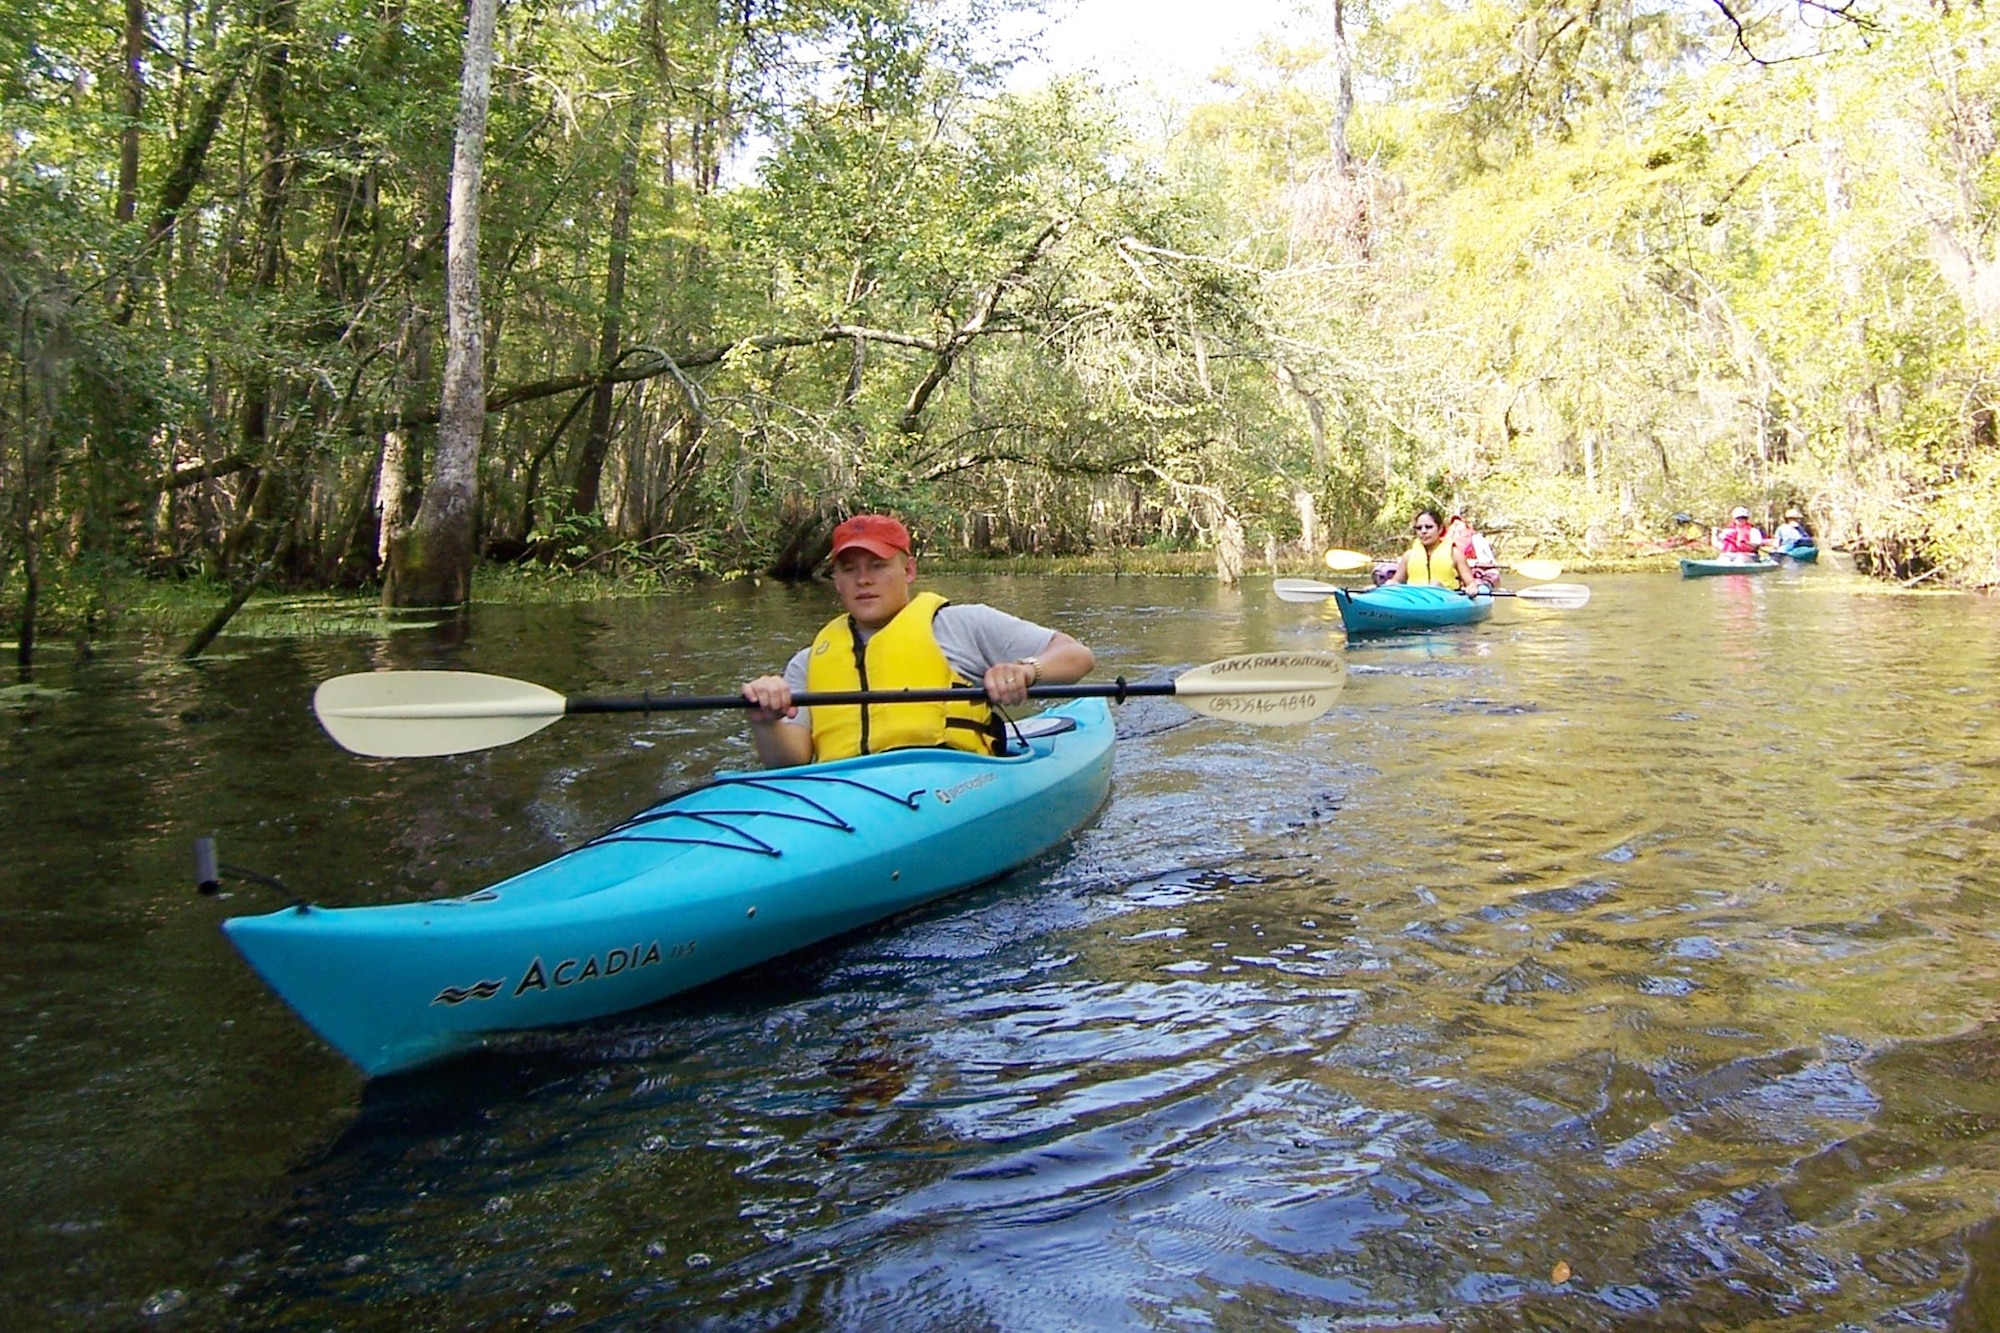 SHAW AIR FORCE BASE, S.C. -- Team Shaw members participate in a kayak trip on the Black River Saturday as part of the Outdoor Adventure program sponsored by 20th Services Squadron outdoor recreation. The program offers a variety of outdoor trips including kayaking, camping and other popular excursions. An upcoming kayak trip Nov. 4 on the Edisto River features a stop at Bee City, known for its abundance of bee hives and honey. (U.S. Air Force photo/Candy Lehman)